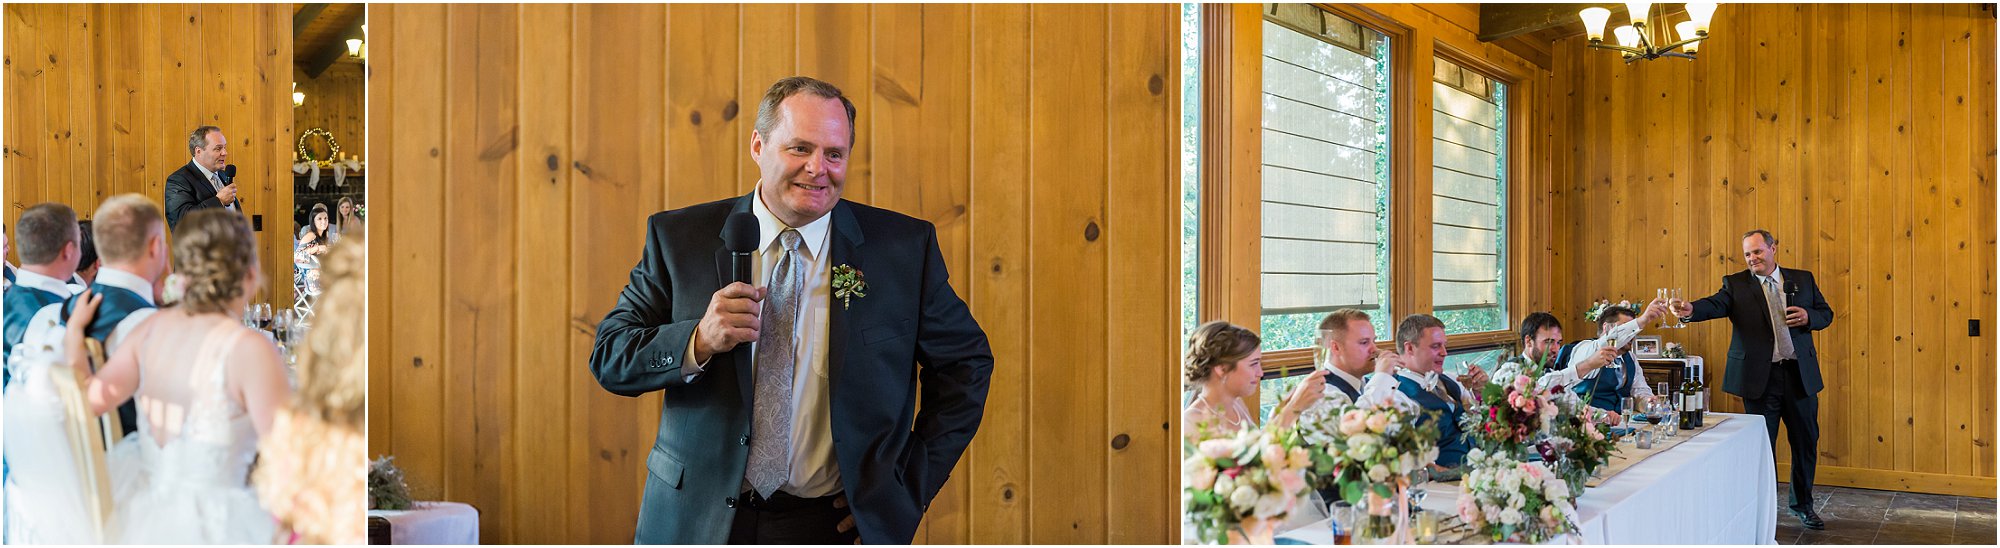 The groom's father says a heartfelt toast during the wedding reception of this rustic Oregon ranch wedding. | Erica Swantek Photography